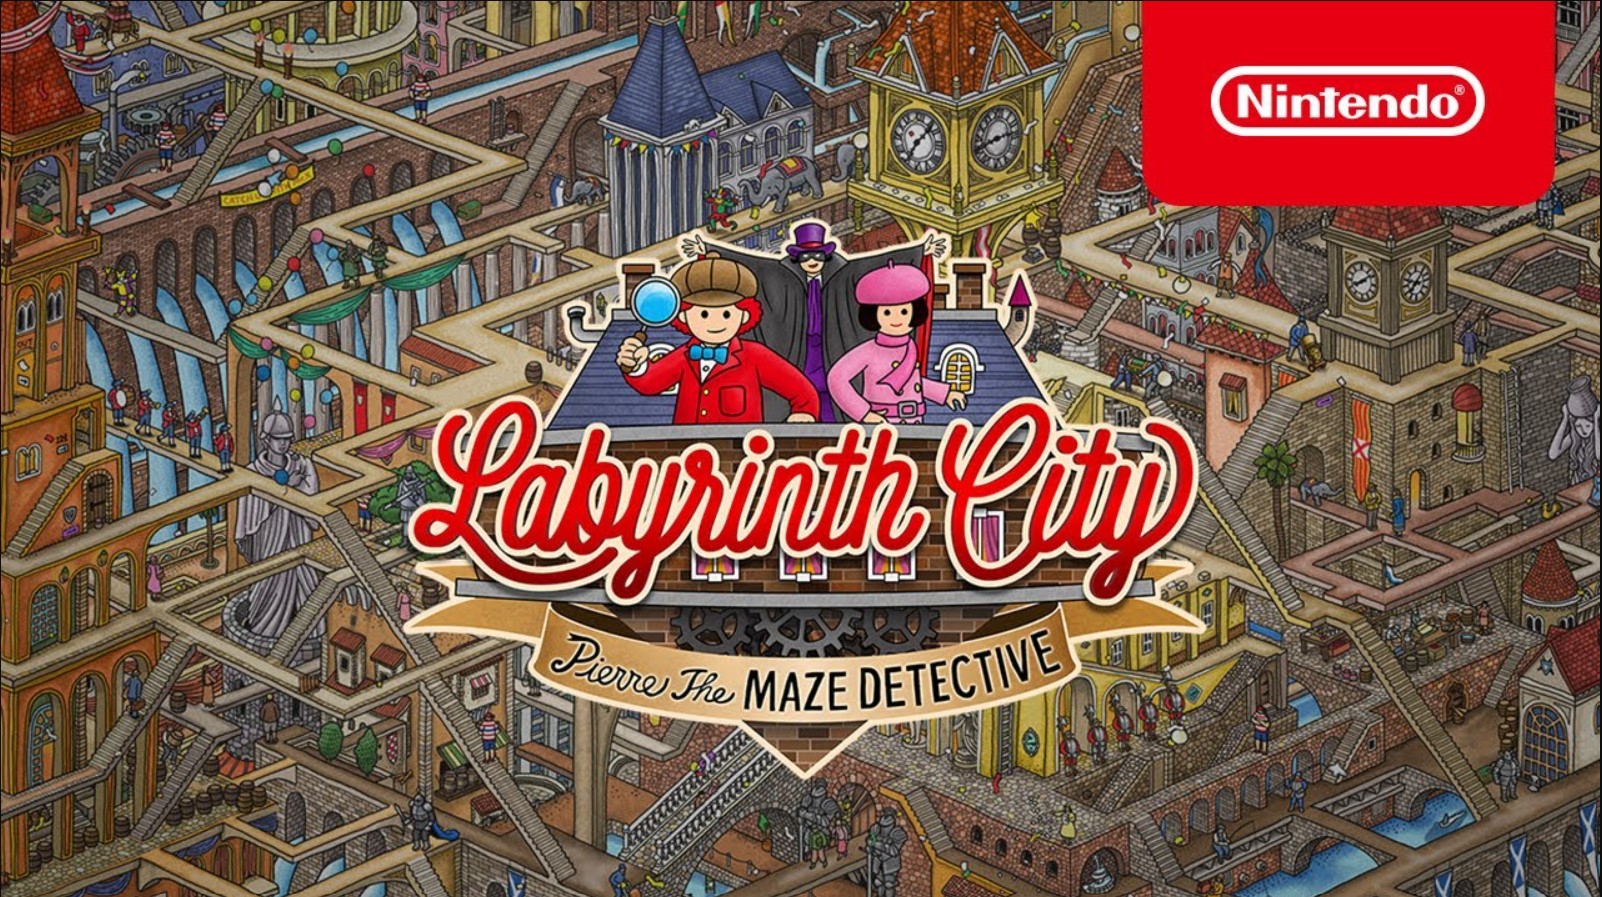 Labyrinth City Pierre the Maze Detective Xbox 360 Version Full Game Free Download